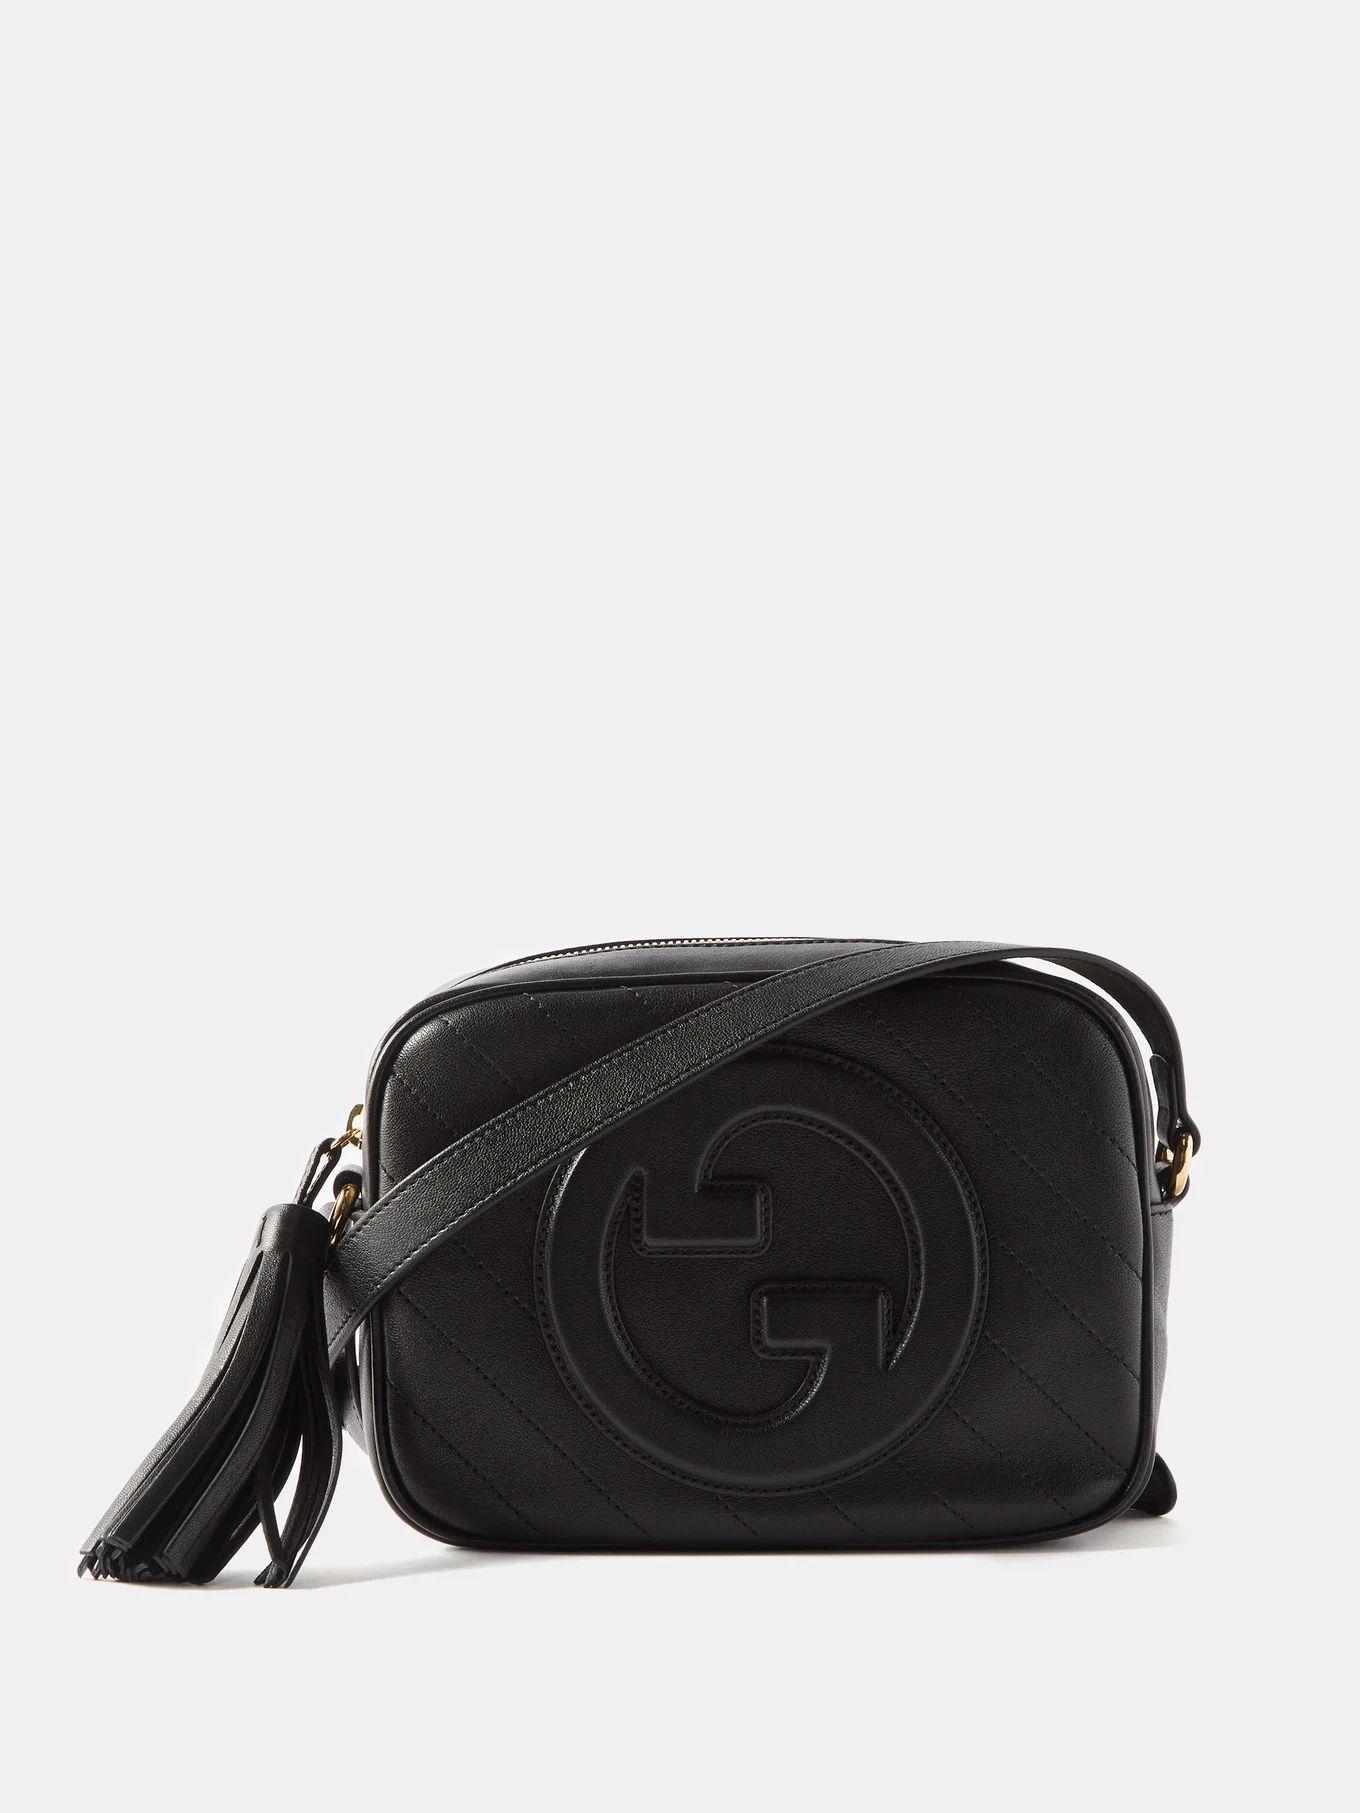 Blondie leather cross-body bag | Gucci | Matches (UK)